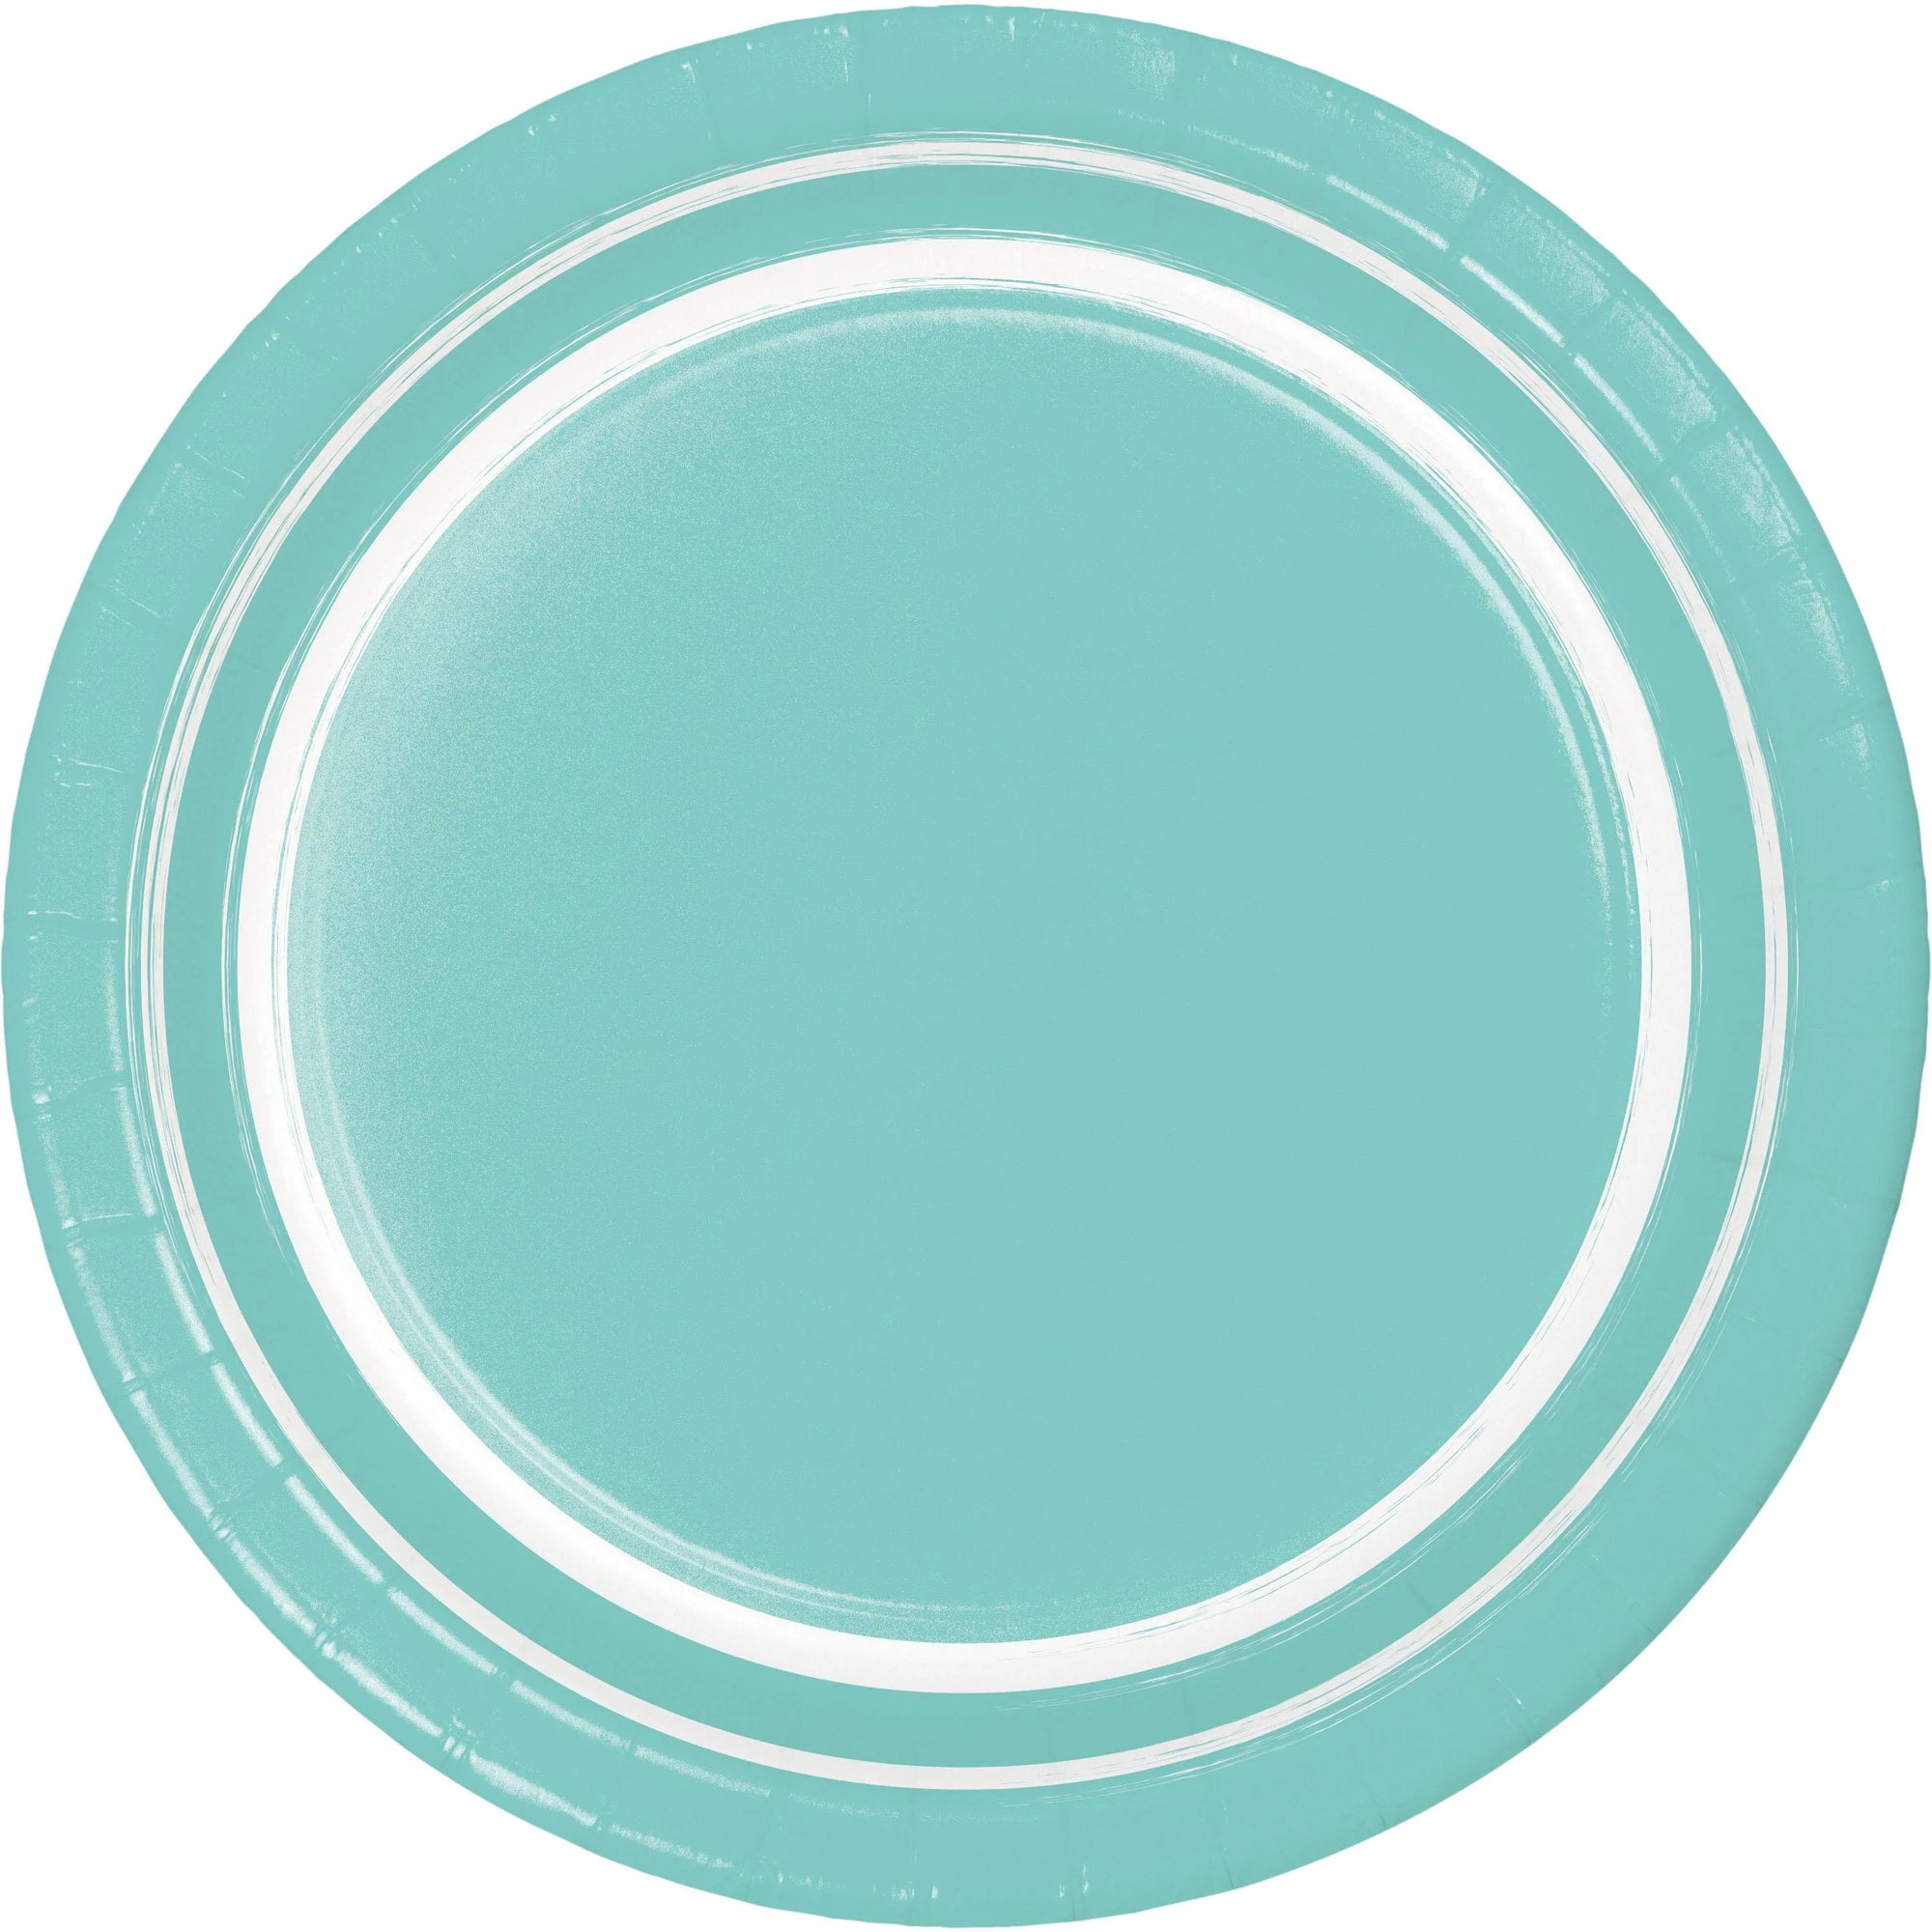 Spa Blue 10ct Sturdy Style 7 Inch Dessert Plate by Creative Converting